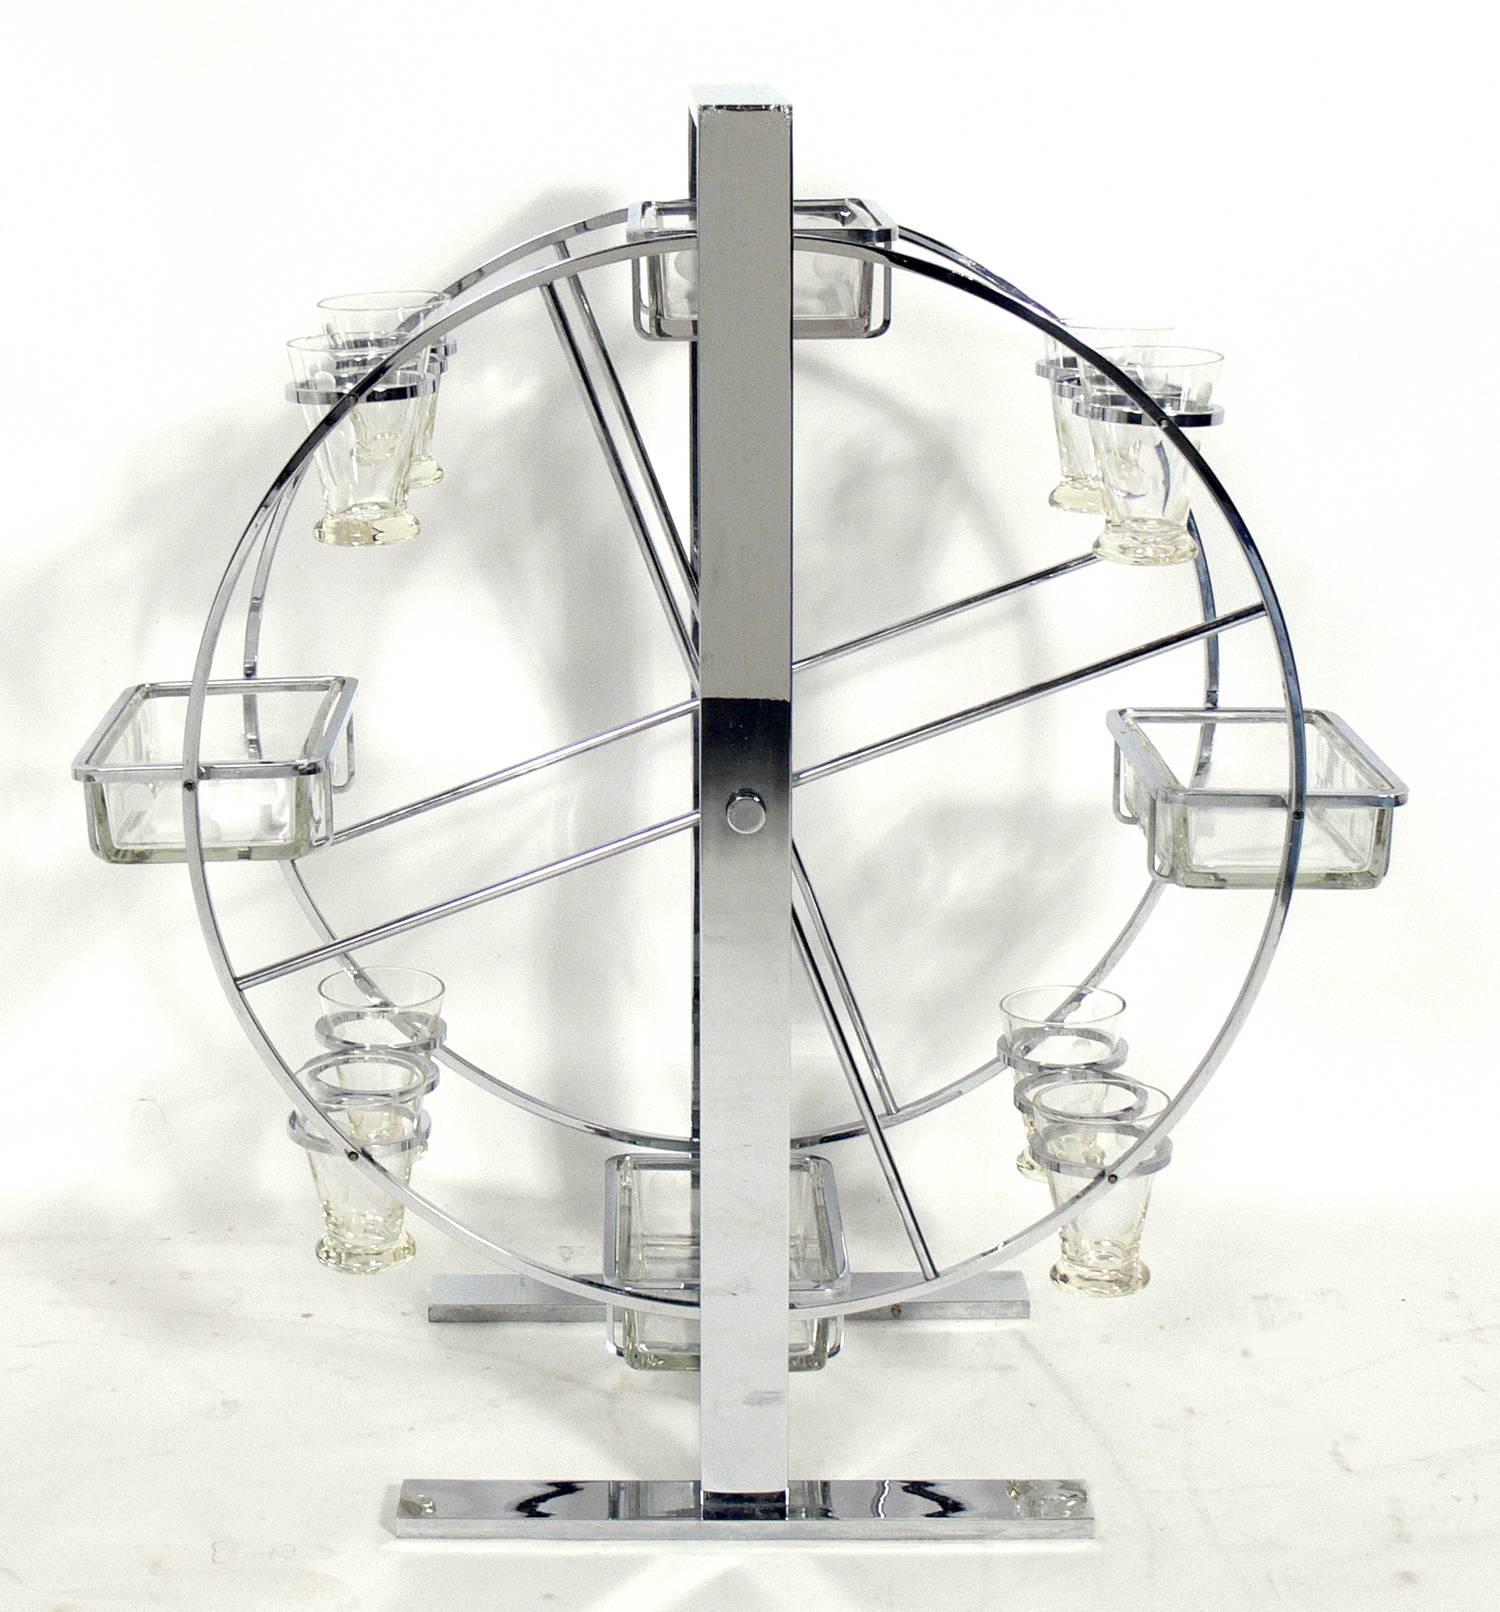 Art Deco Ferris wheel cocktail server, attributed to Norman Bel Geddes, American, circa 1930s. This piece was used to serve cocktails and snacks. It has been polished and is ready to use. Consist of four glass snack serving trays and eight cocktail